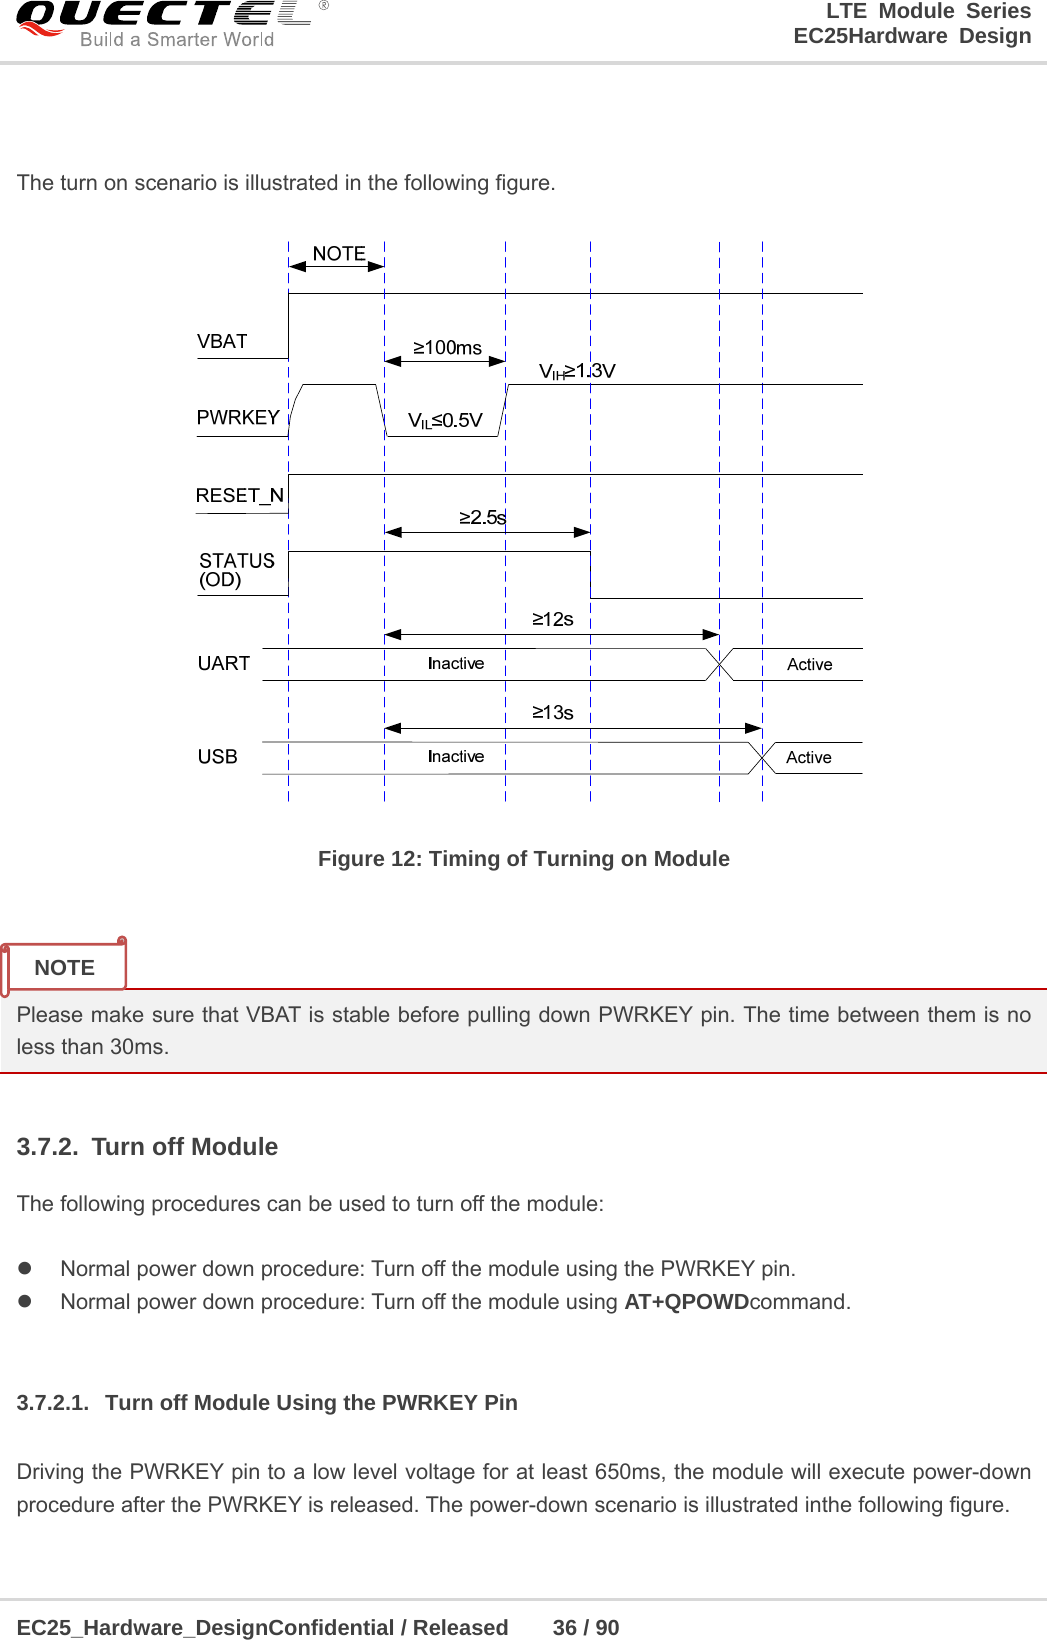 LTE Module Series                                                  EC25Hardware Design  EC25_Hardware_DesignConfidential / Released    36 / 90      The turn on scenario is illustrated in the following figure.  Figure 12: Timing of Turning on Module   Please make sure that VBAT is stable before pulling down PWRKEY pin. The time between them is no less than 30ms.  3.7.2.  Turn off Module The following procedures can be used to turn off the module:    Normal power down procedure: Turn off the module using the PWRKEY pin.   Normal power down procedure: Turn off the module using AT+QPOWDcommand.  3.7.2.1.  Turn off Module Using the PWRKEY Pin Driving the PWRKEY pin to a low level voltage for at least 650ms, the module will execute power-down procedure after the PWRKEY is released. The power-down scenario is illustrated inthe following figure. NOTE 